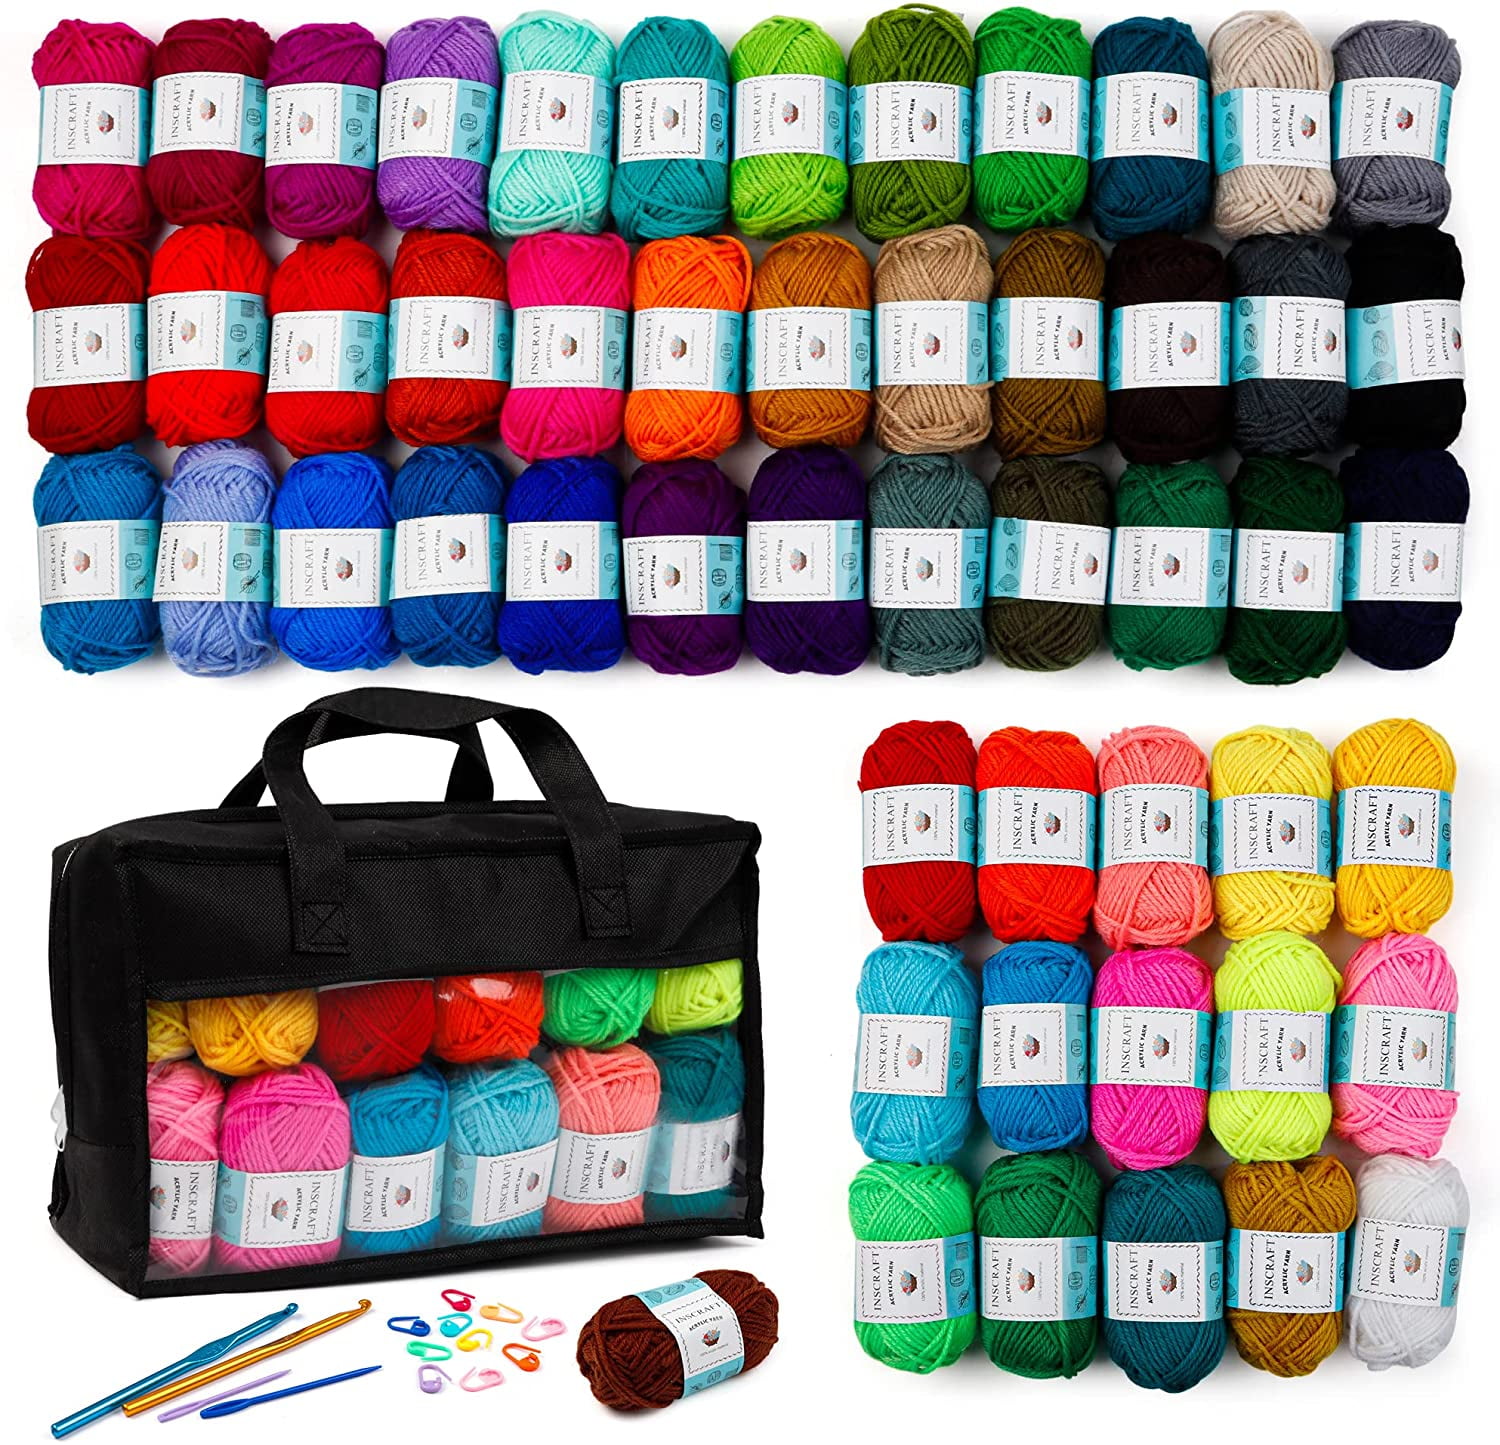 62 Acrylic Yarn Skeins, 2170 Yards Yarn for Knitting and Crochet, Includes  2 Crochet Hooks,2 Weaving Needles,6 E-Books, 10 Stitch Markers, Perfect  Crochet Beginner Kit for for Adults Kids by Inscraft 